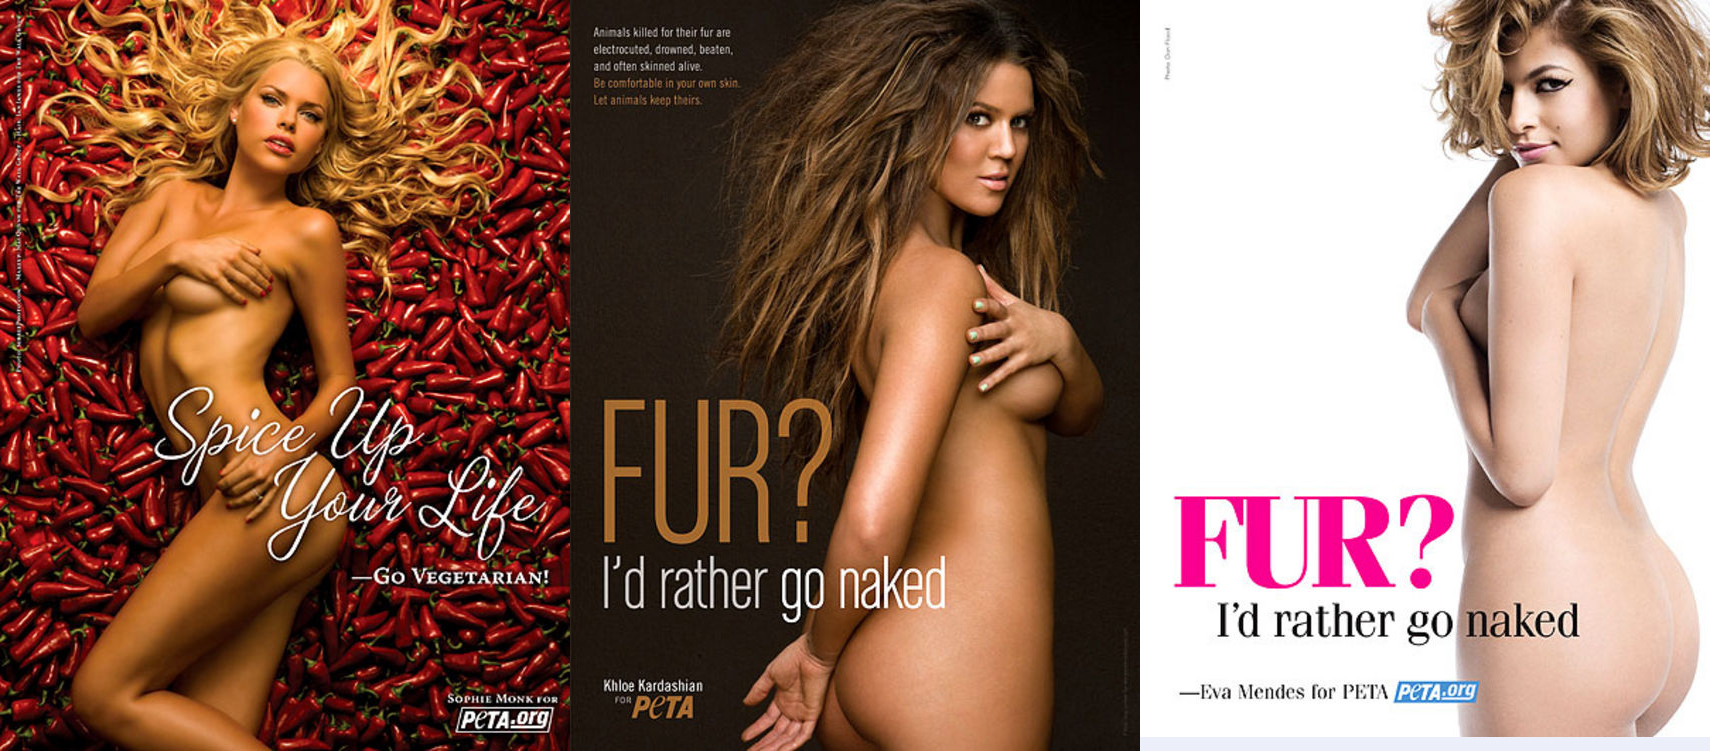 'naked campaign' featuring images of celebrities, completely nude, with the slogan 'I'd r...